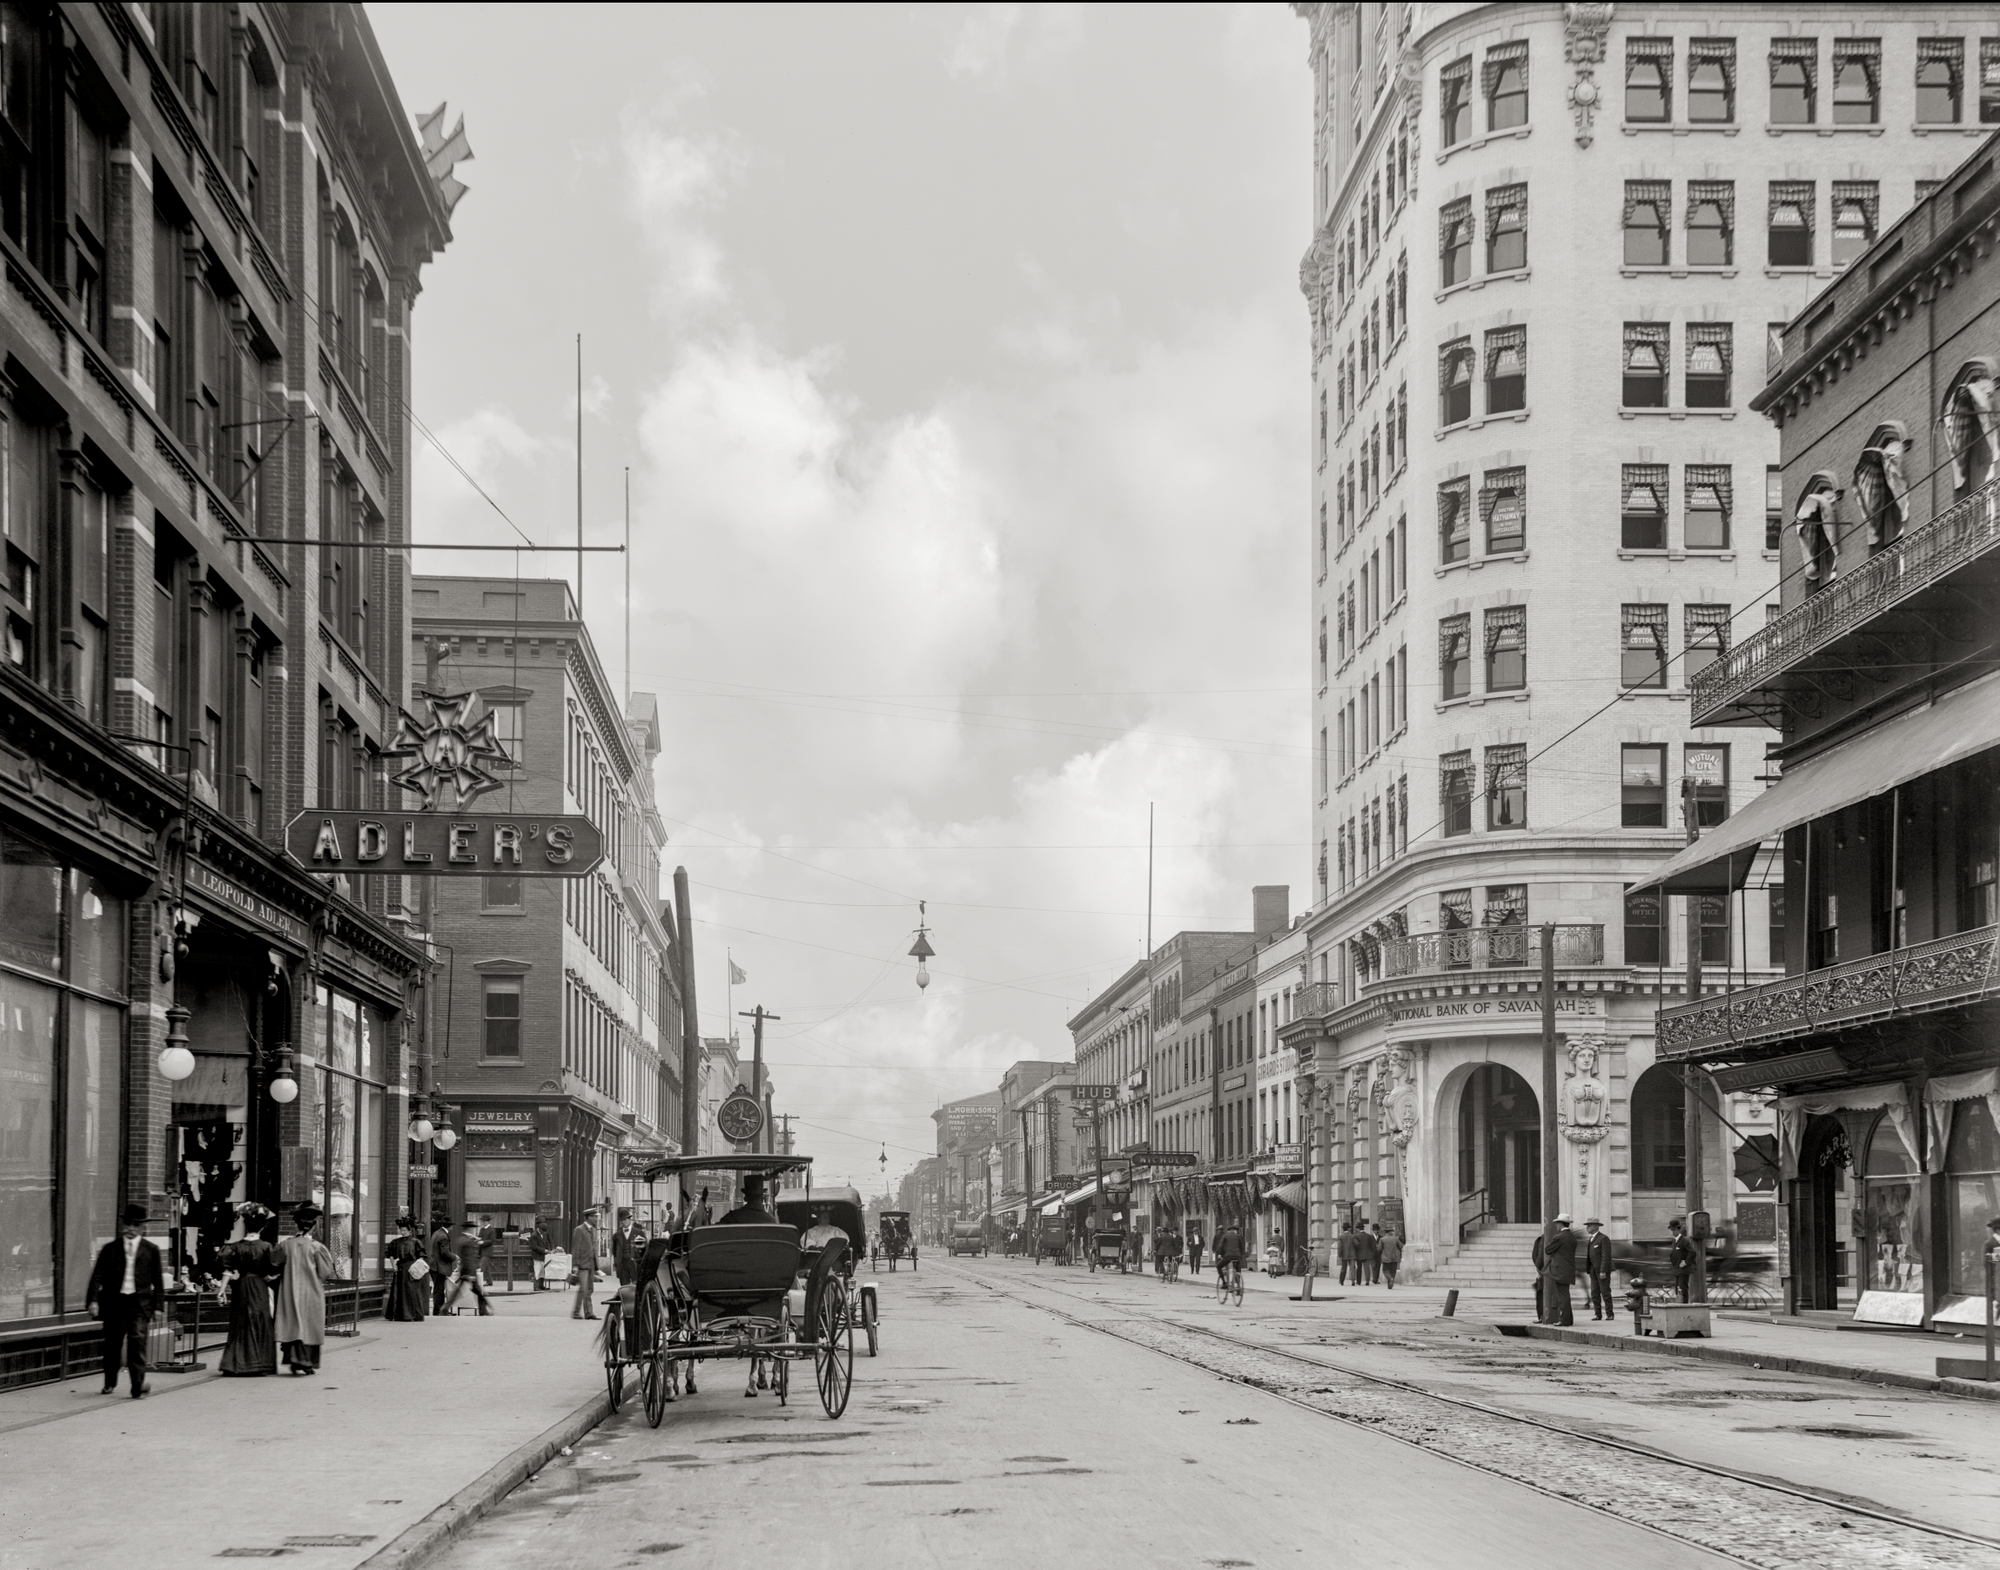 Camera is at eye level looking down Broughton Street to the West. There are signs for banks and stores with a horse drawn buggy in the foreground.